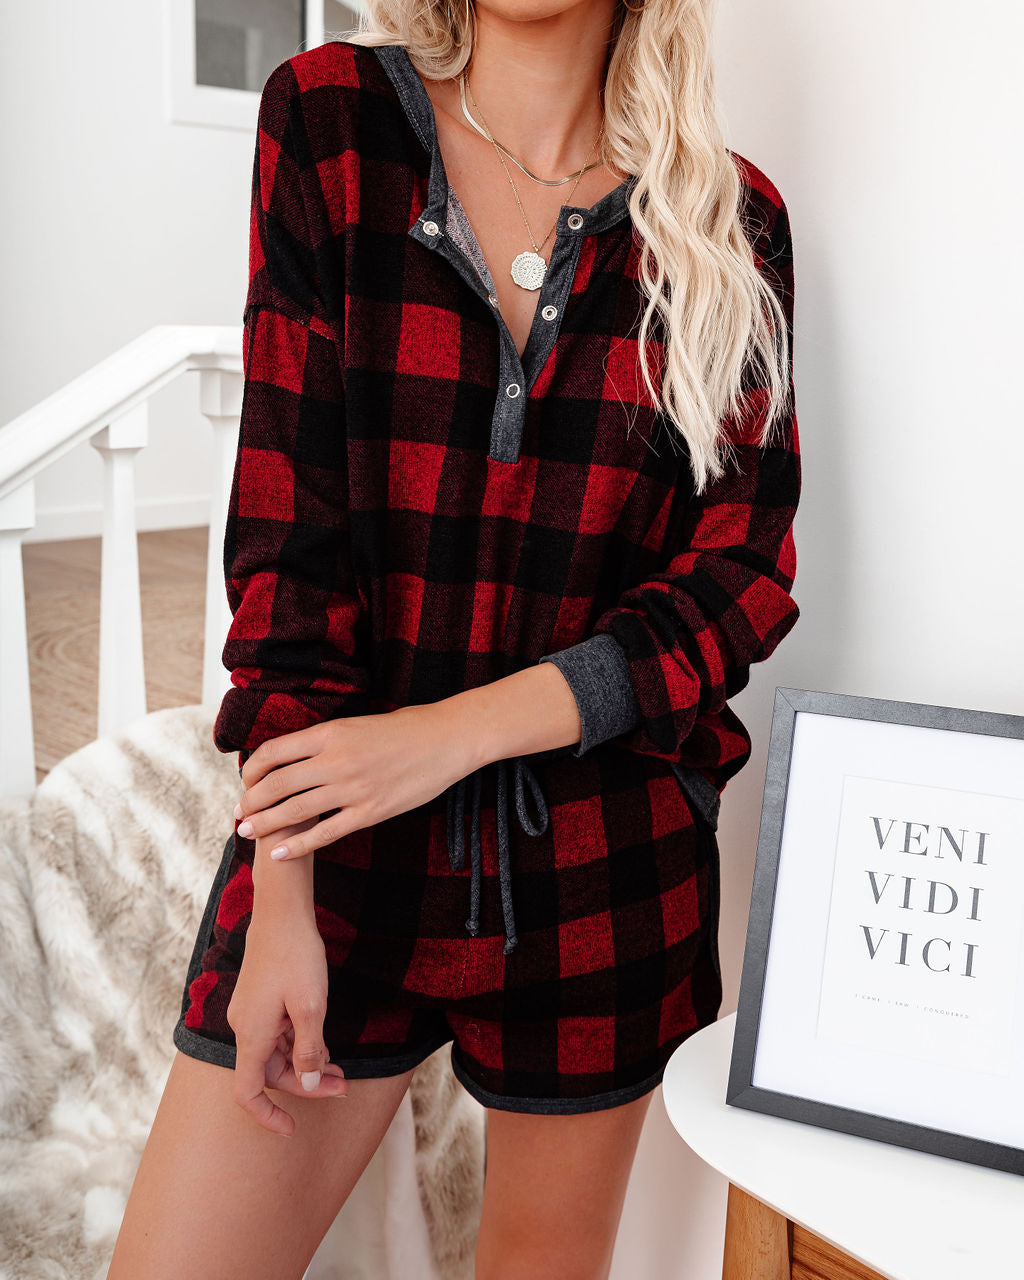 Bedtime Stories Buffalo Plaid Pocketed Knit Shorts - FINAL SALE InsStreet